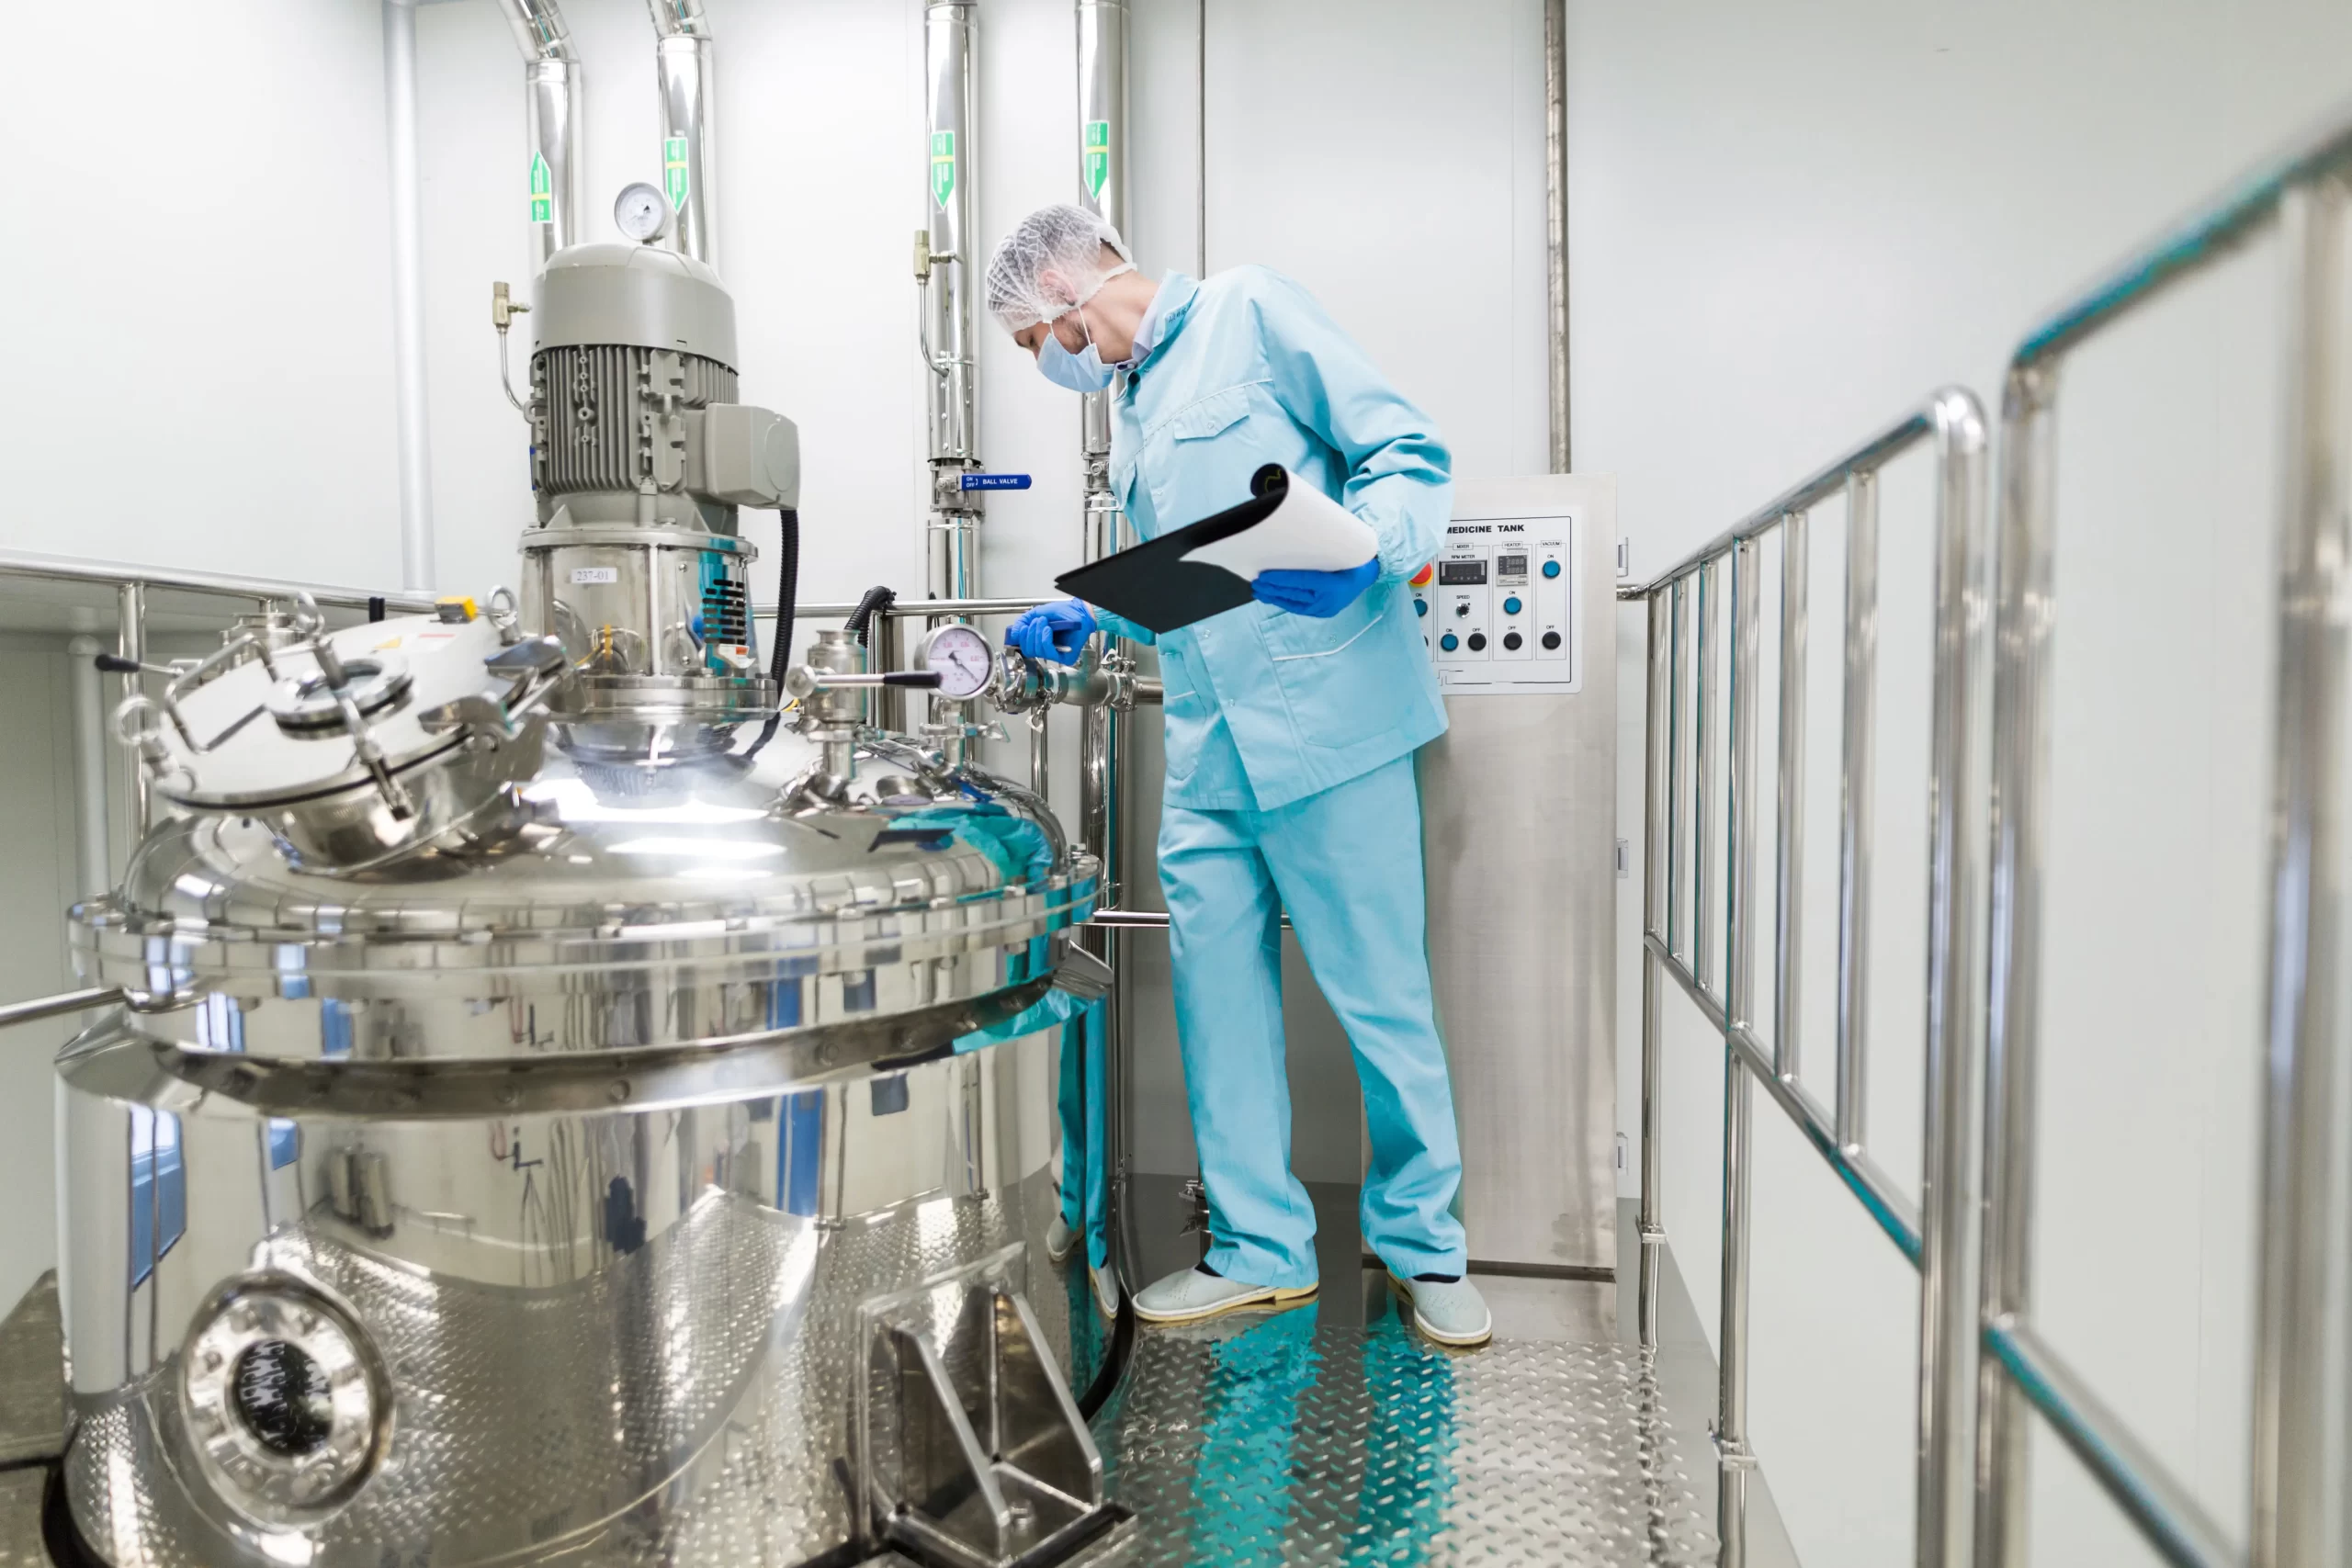 Image of a worker in a clean food safety facility